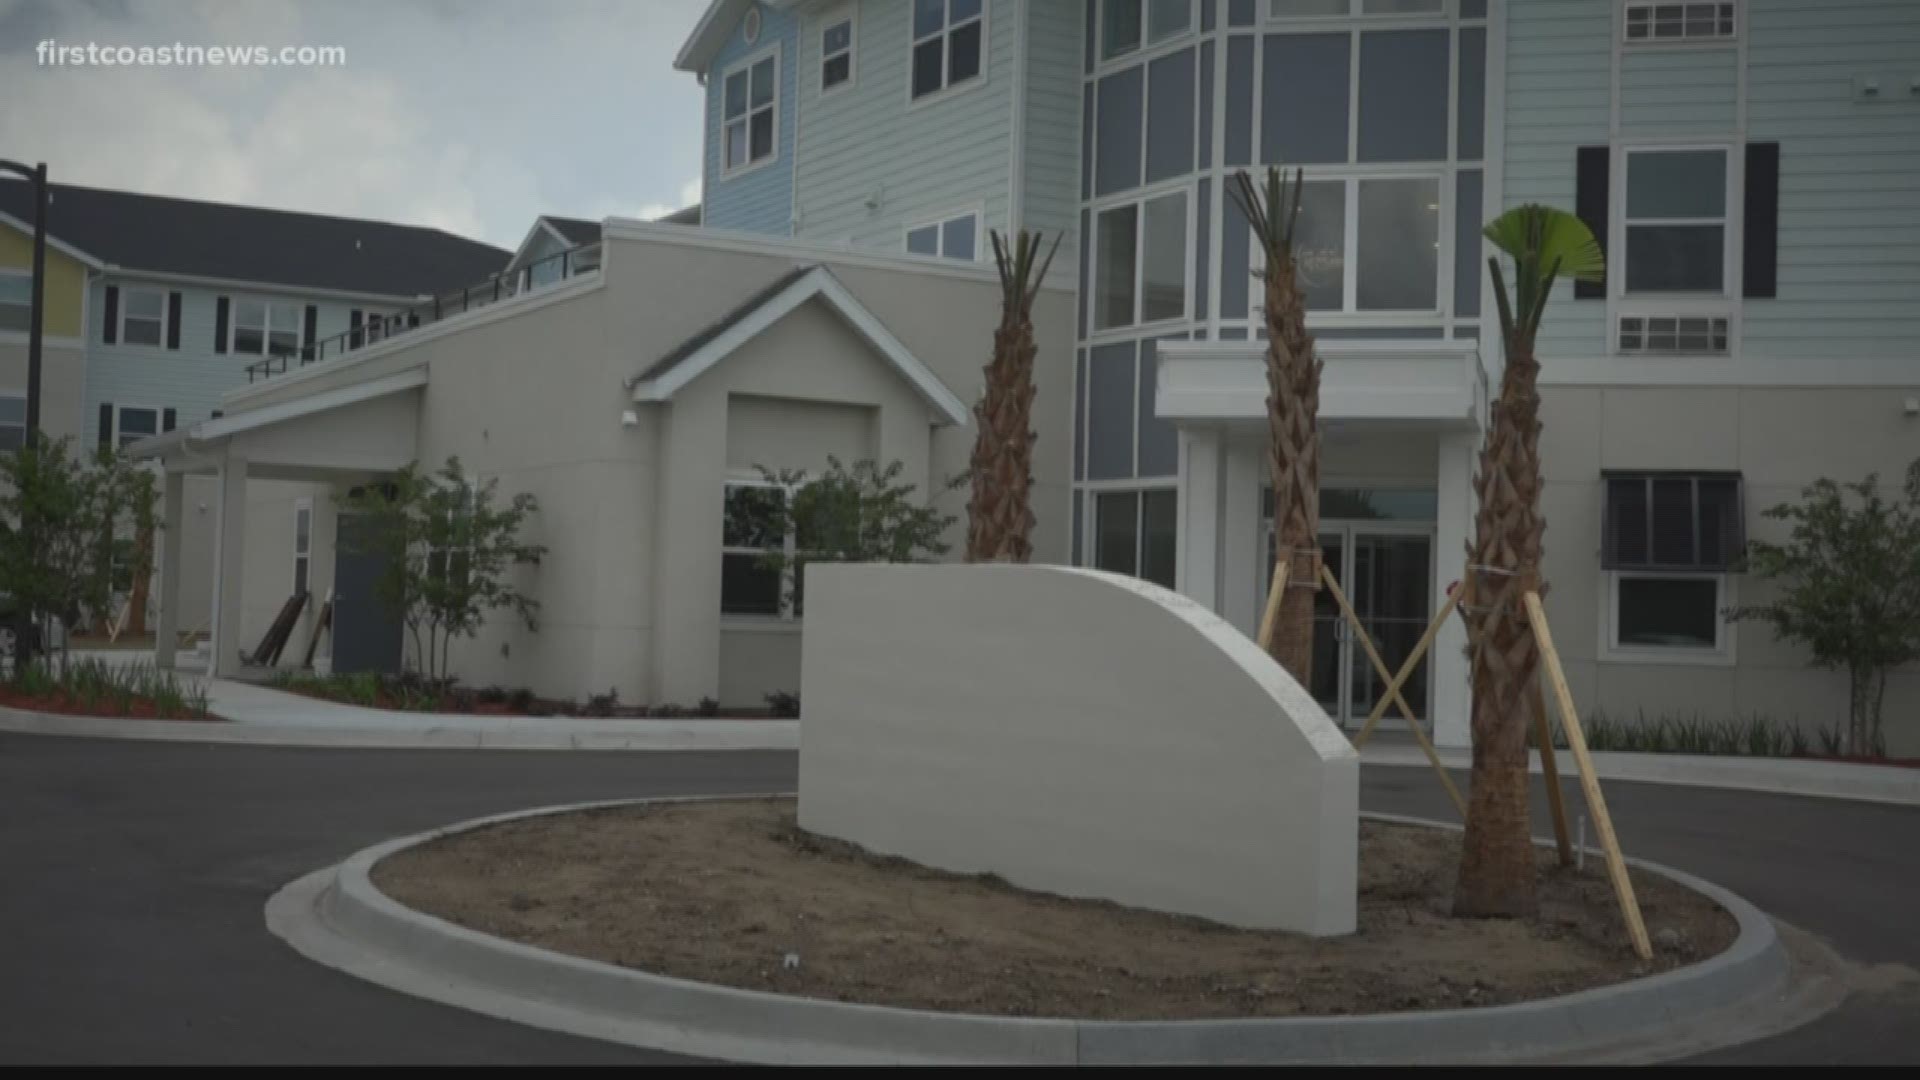 A sprawling complex created to serve homeless women and families in Jacksonville is nearing completion.